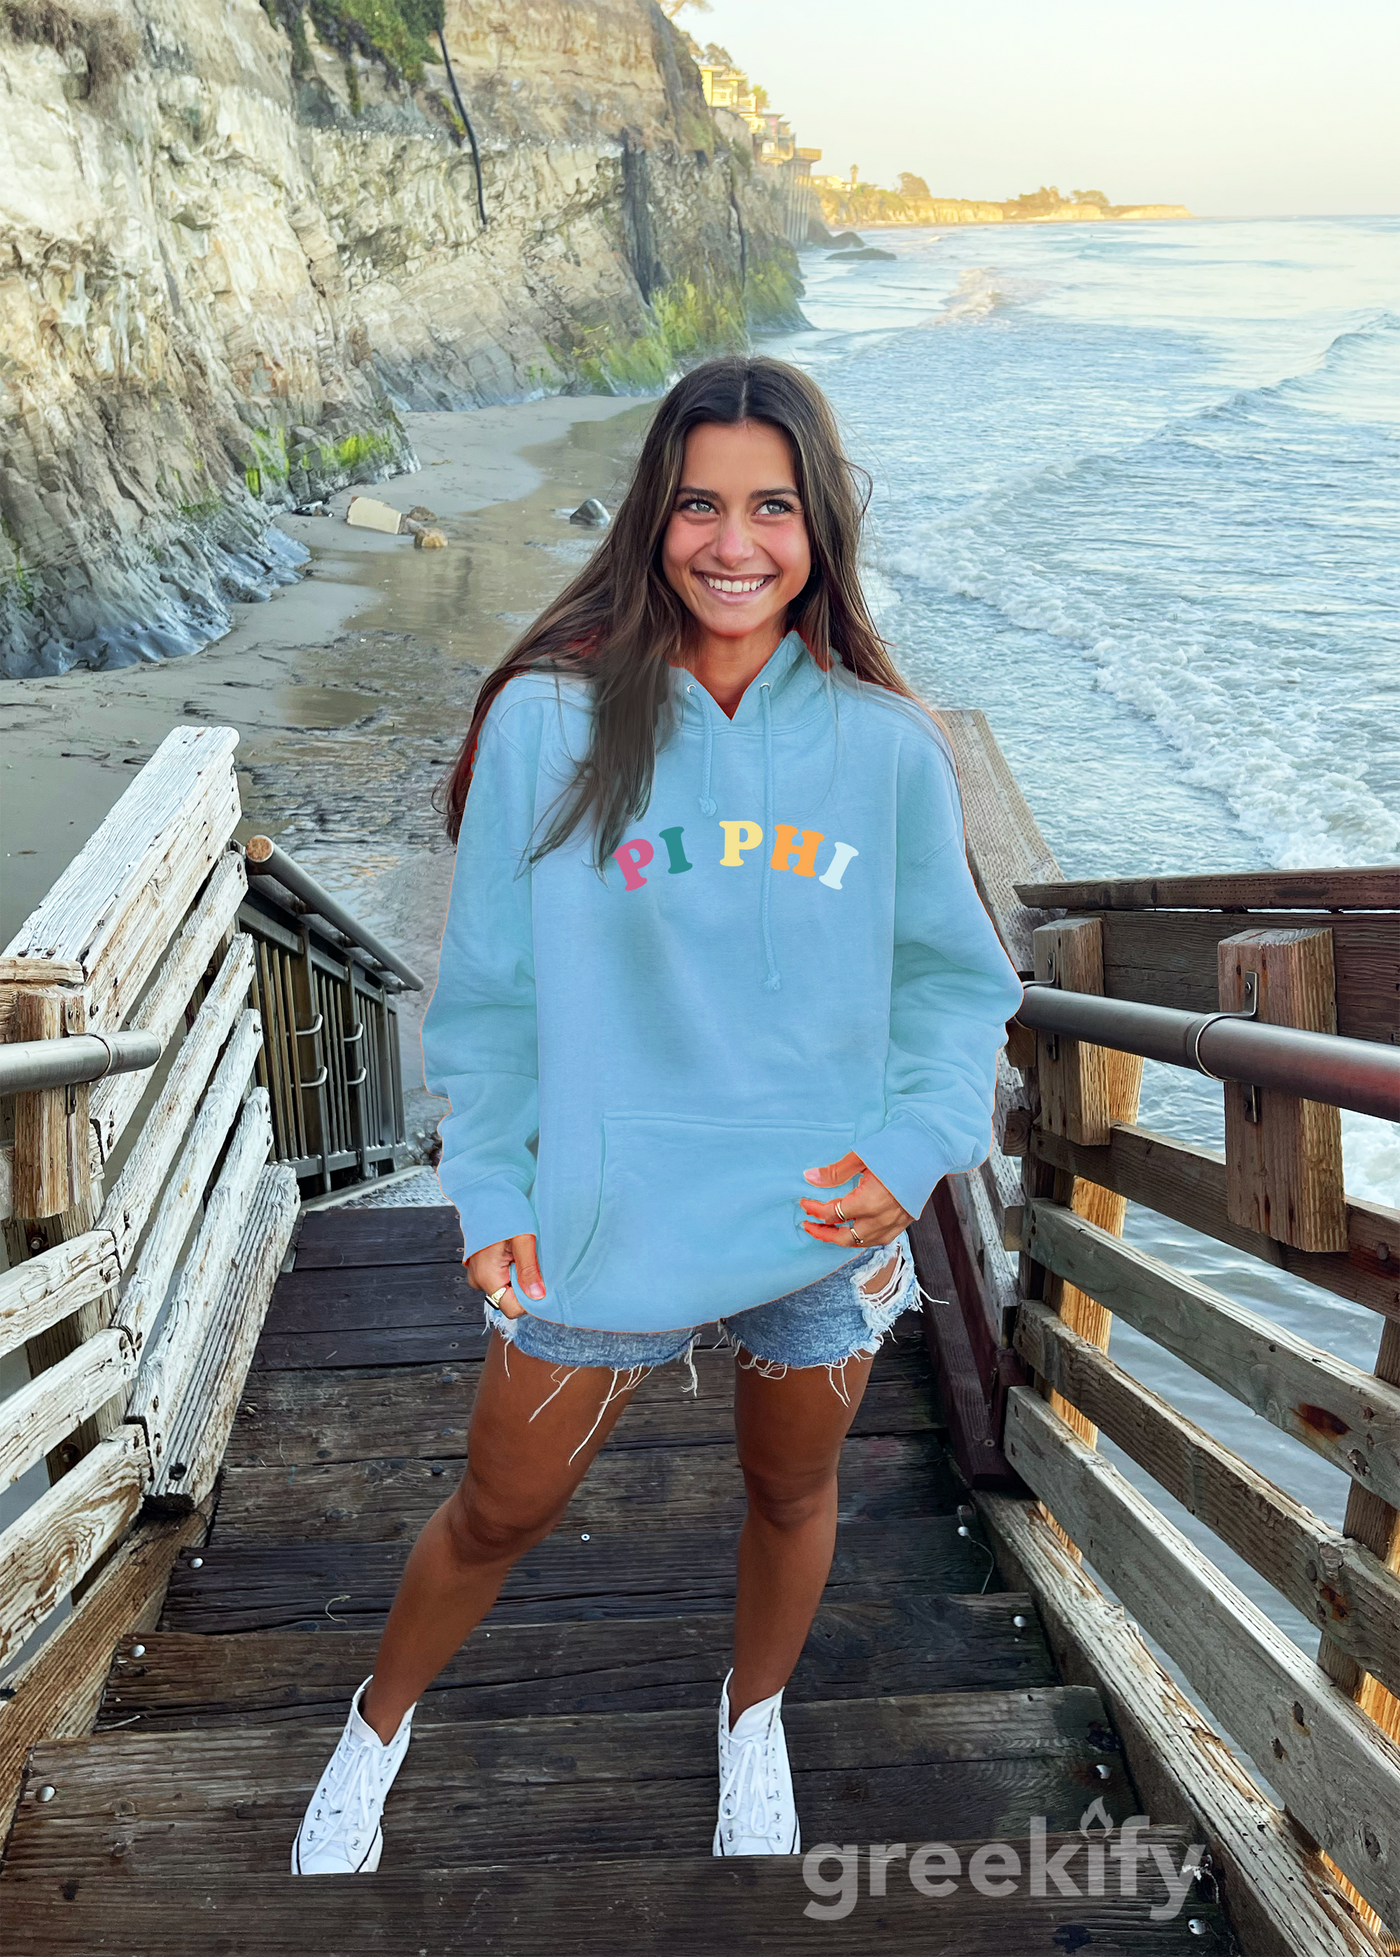 Pi Phi Colorful Text Cute Mad Happy Trendy Sorority Hoodie